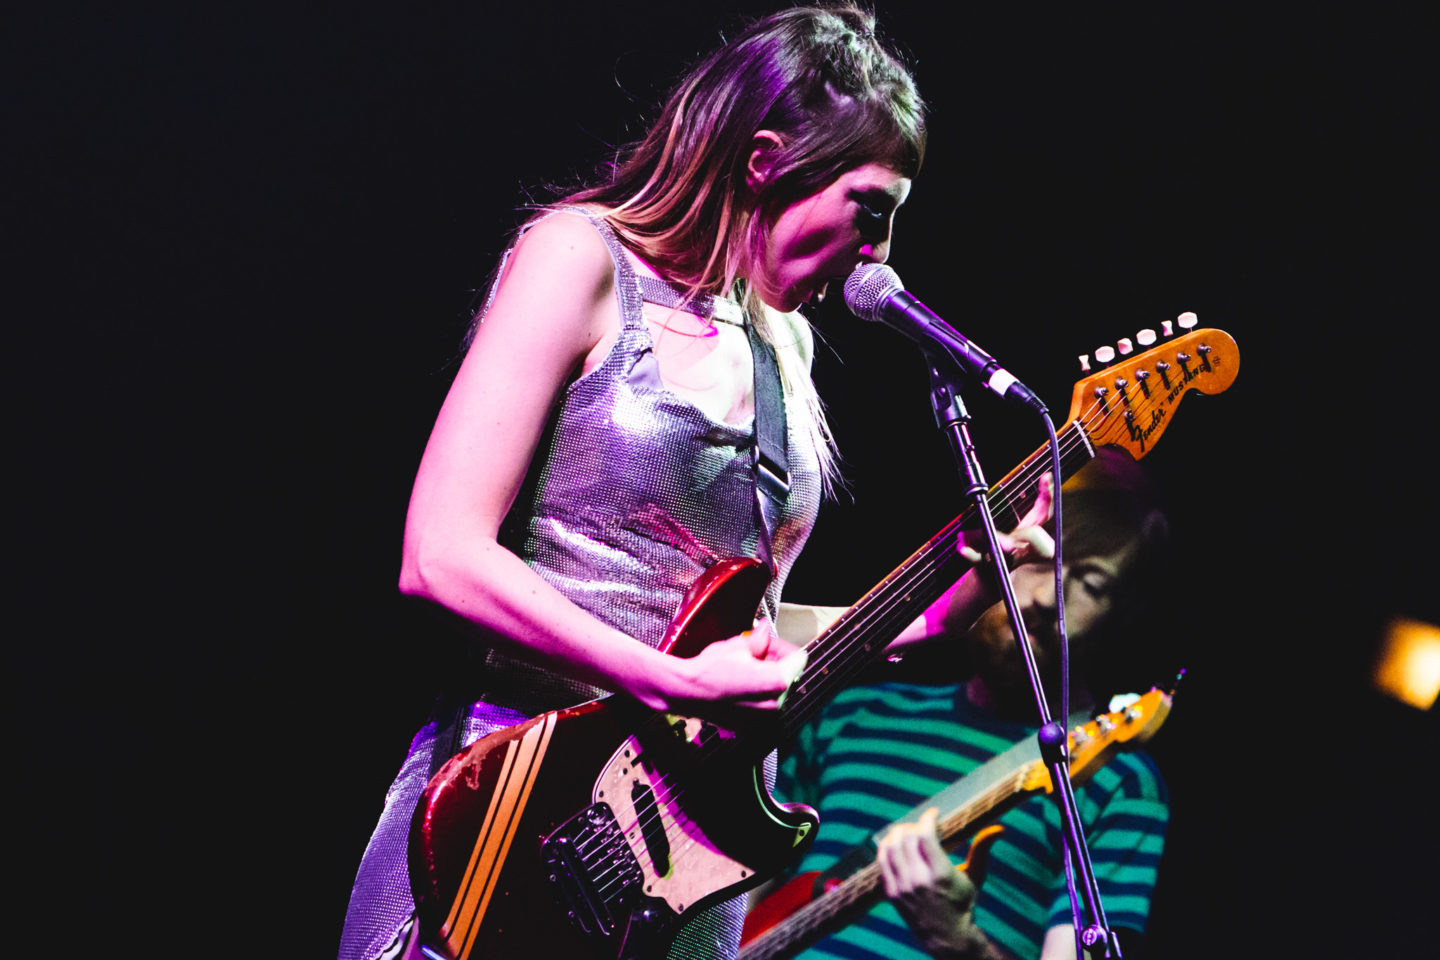 Charly Bliss at Auditorium Theatre